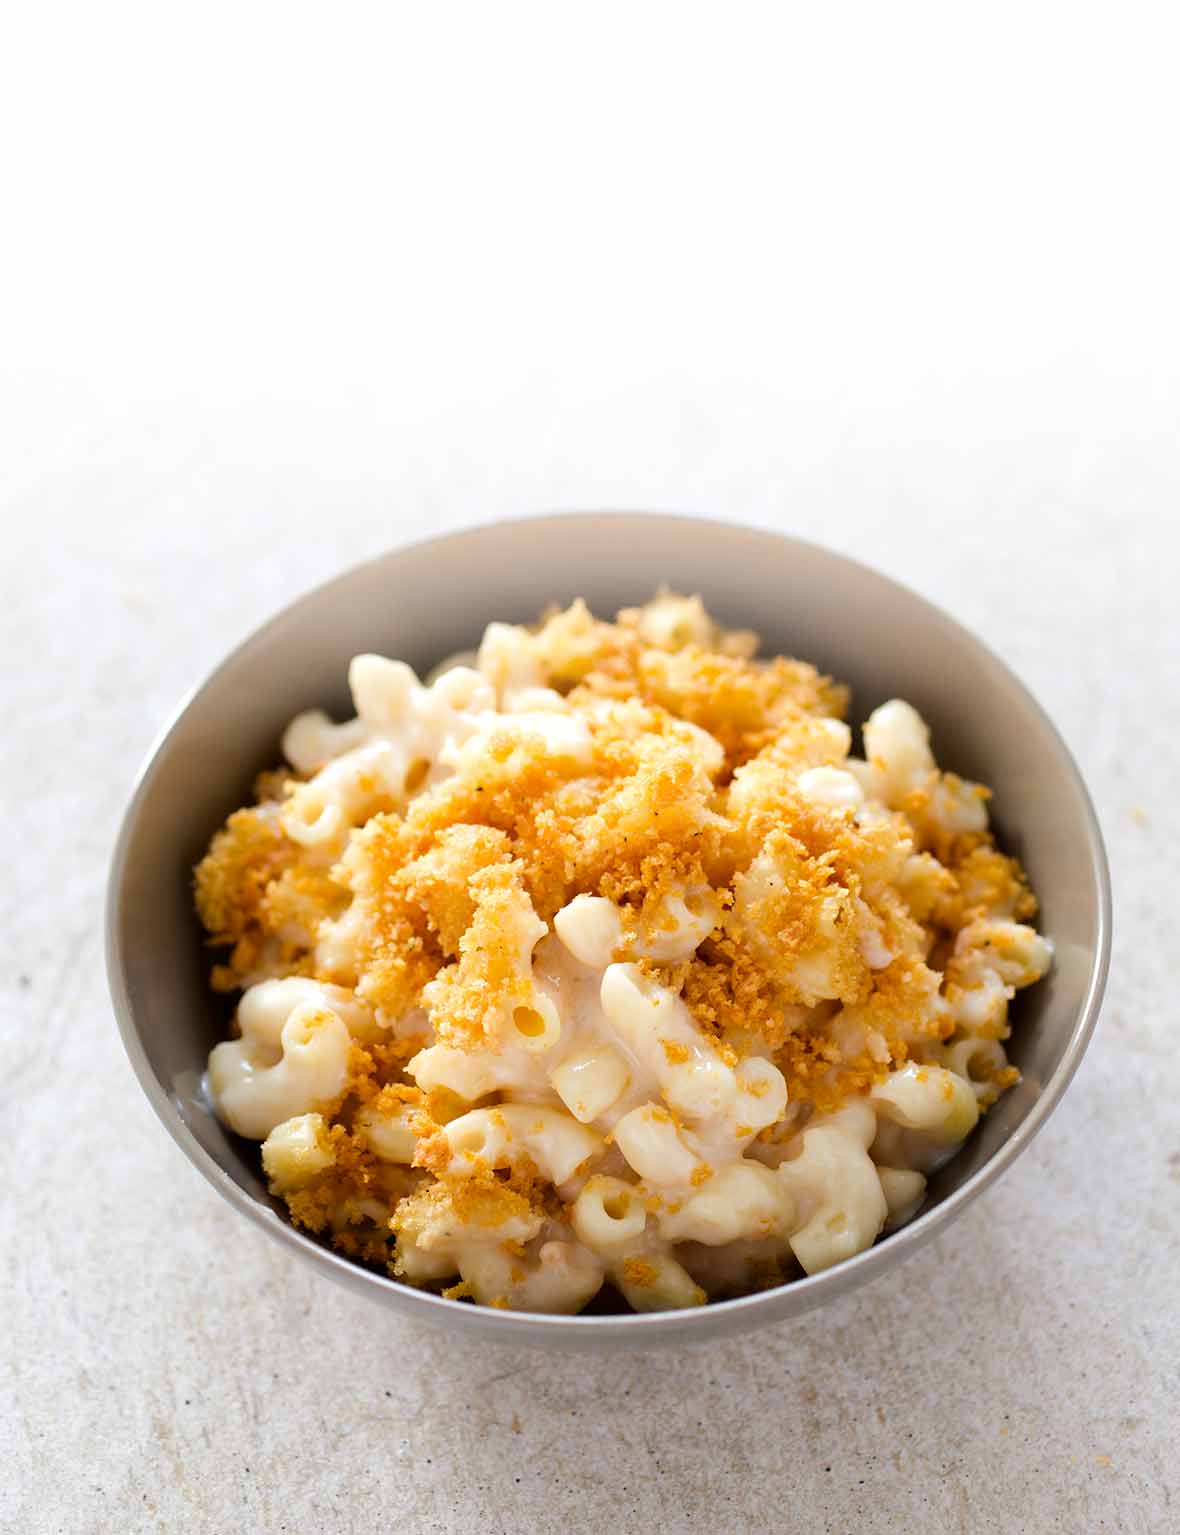 Mueller S Baked Macaroni And Cheese Recipe With Flour Bryont Blog